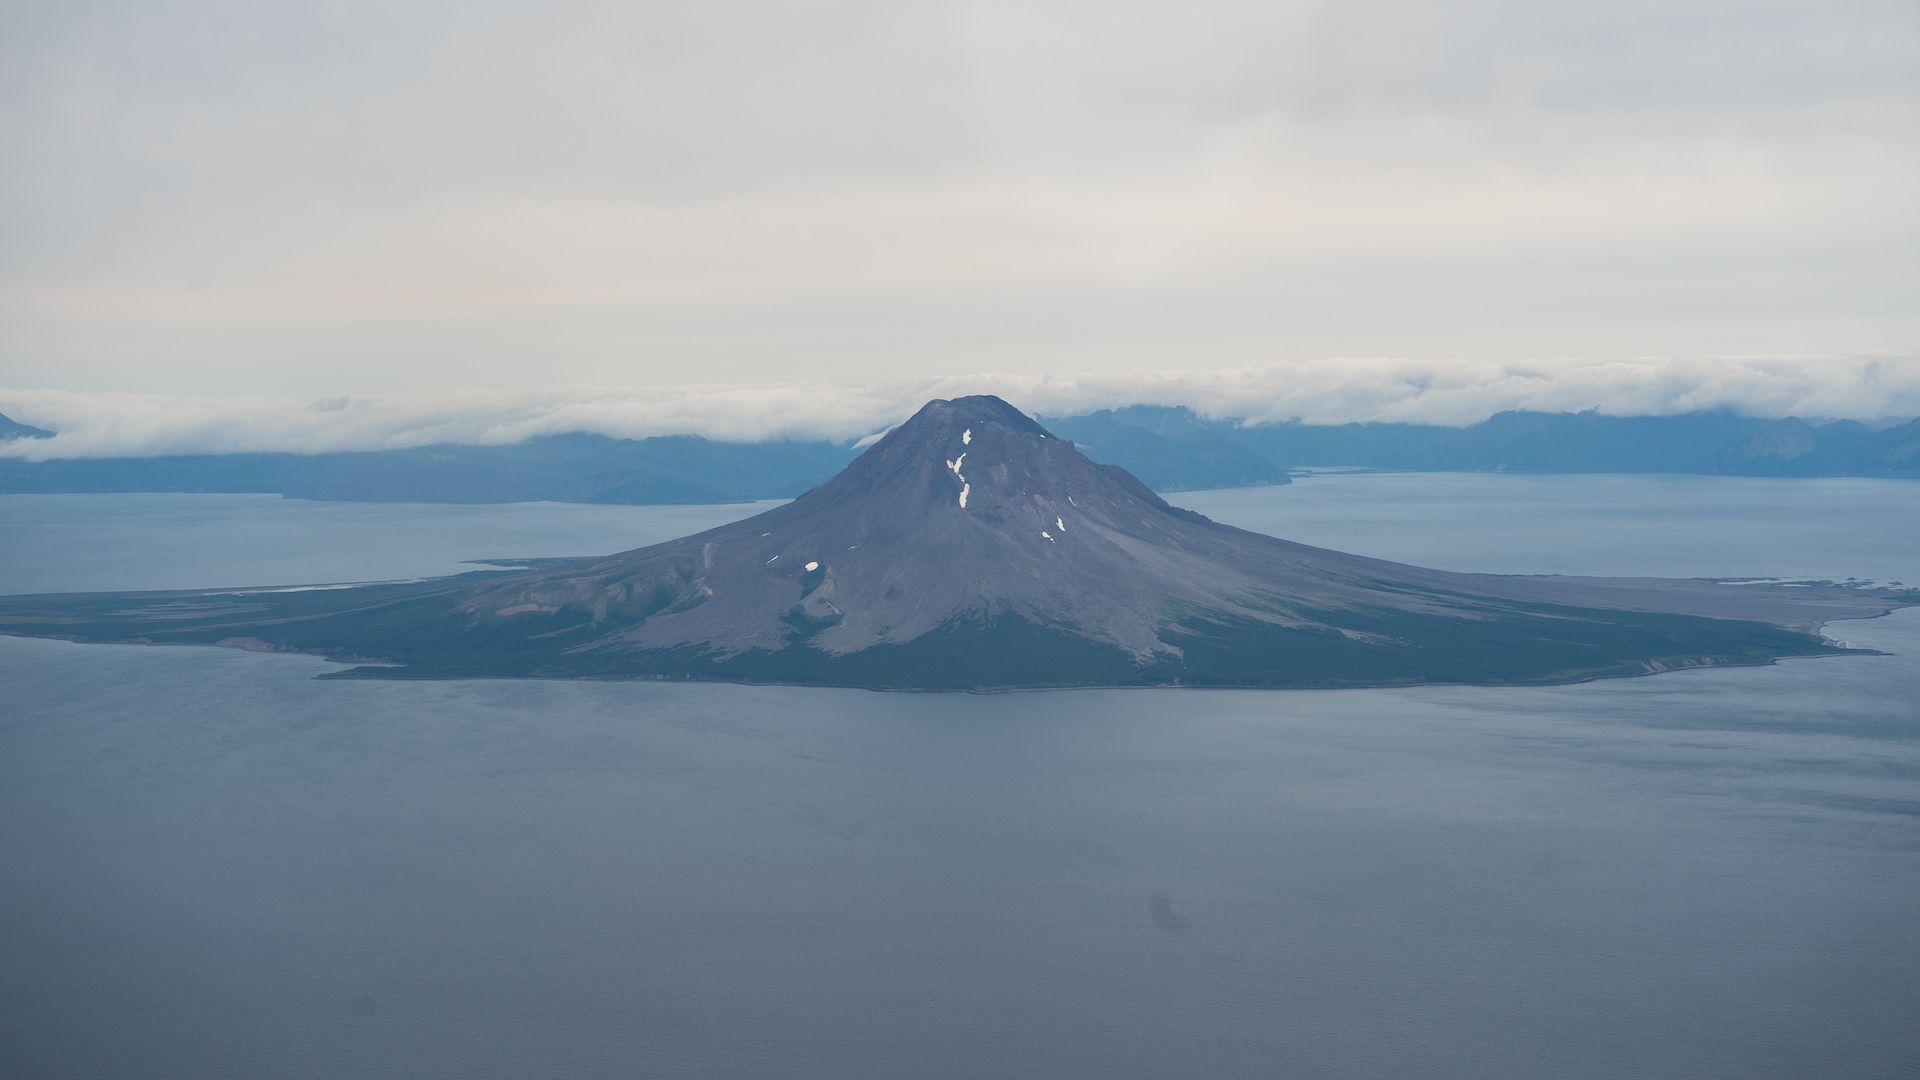 The visibility was excellent as we passed Augustine Volcano that last erupted in 2006.